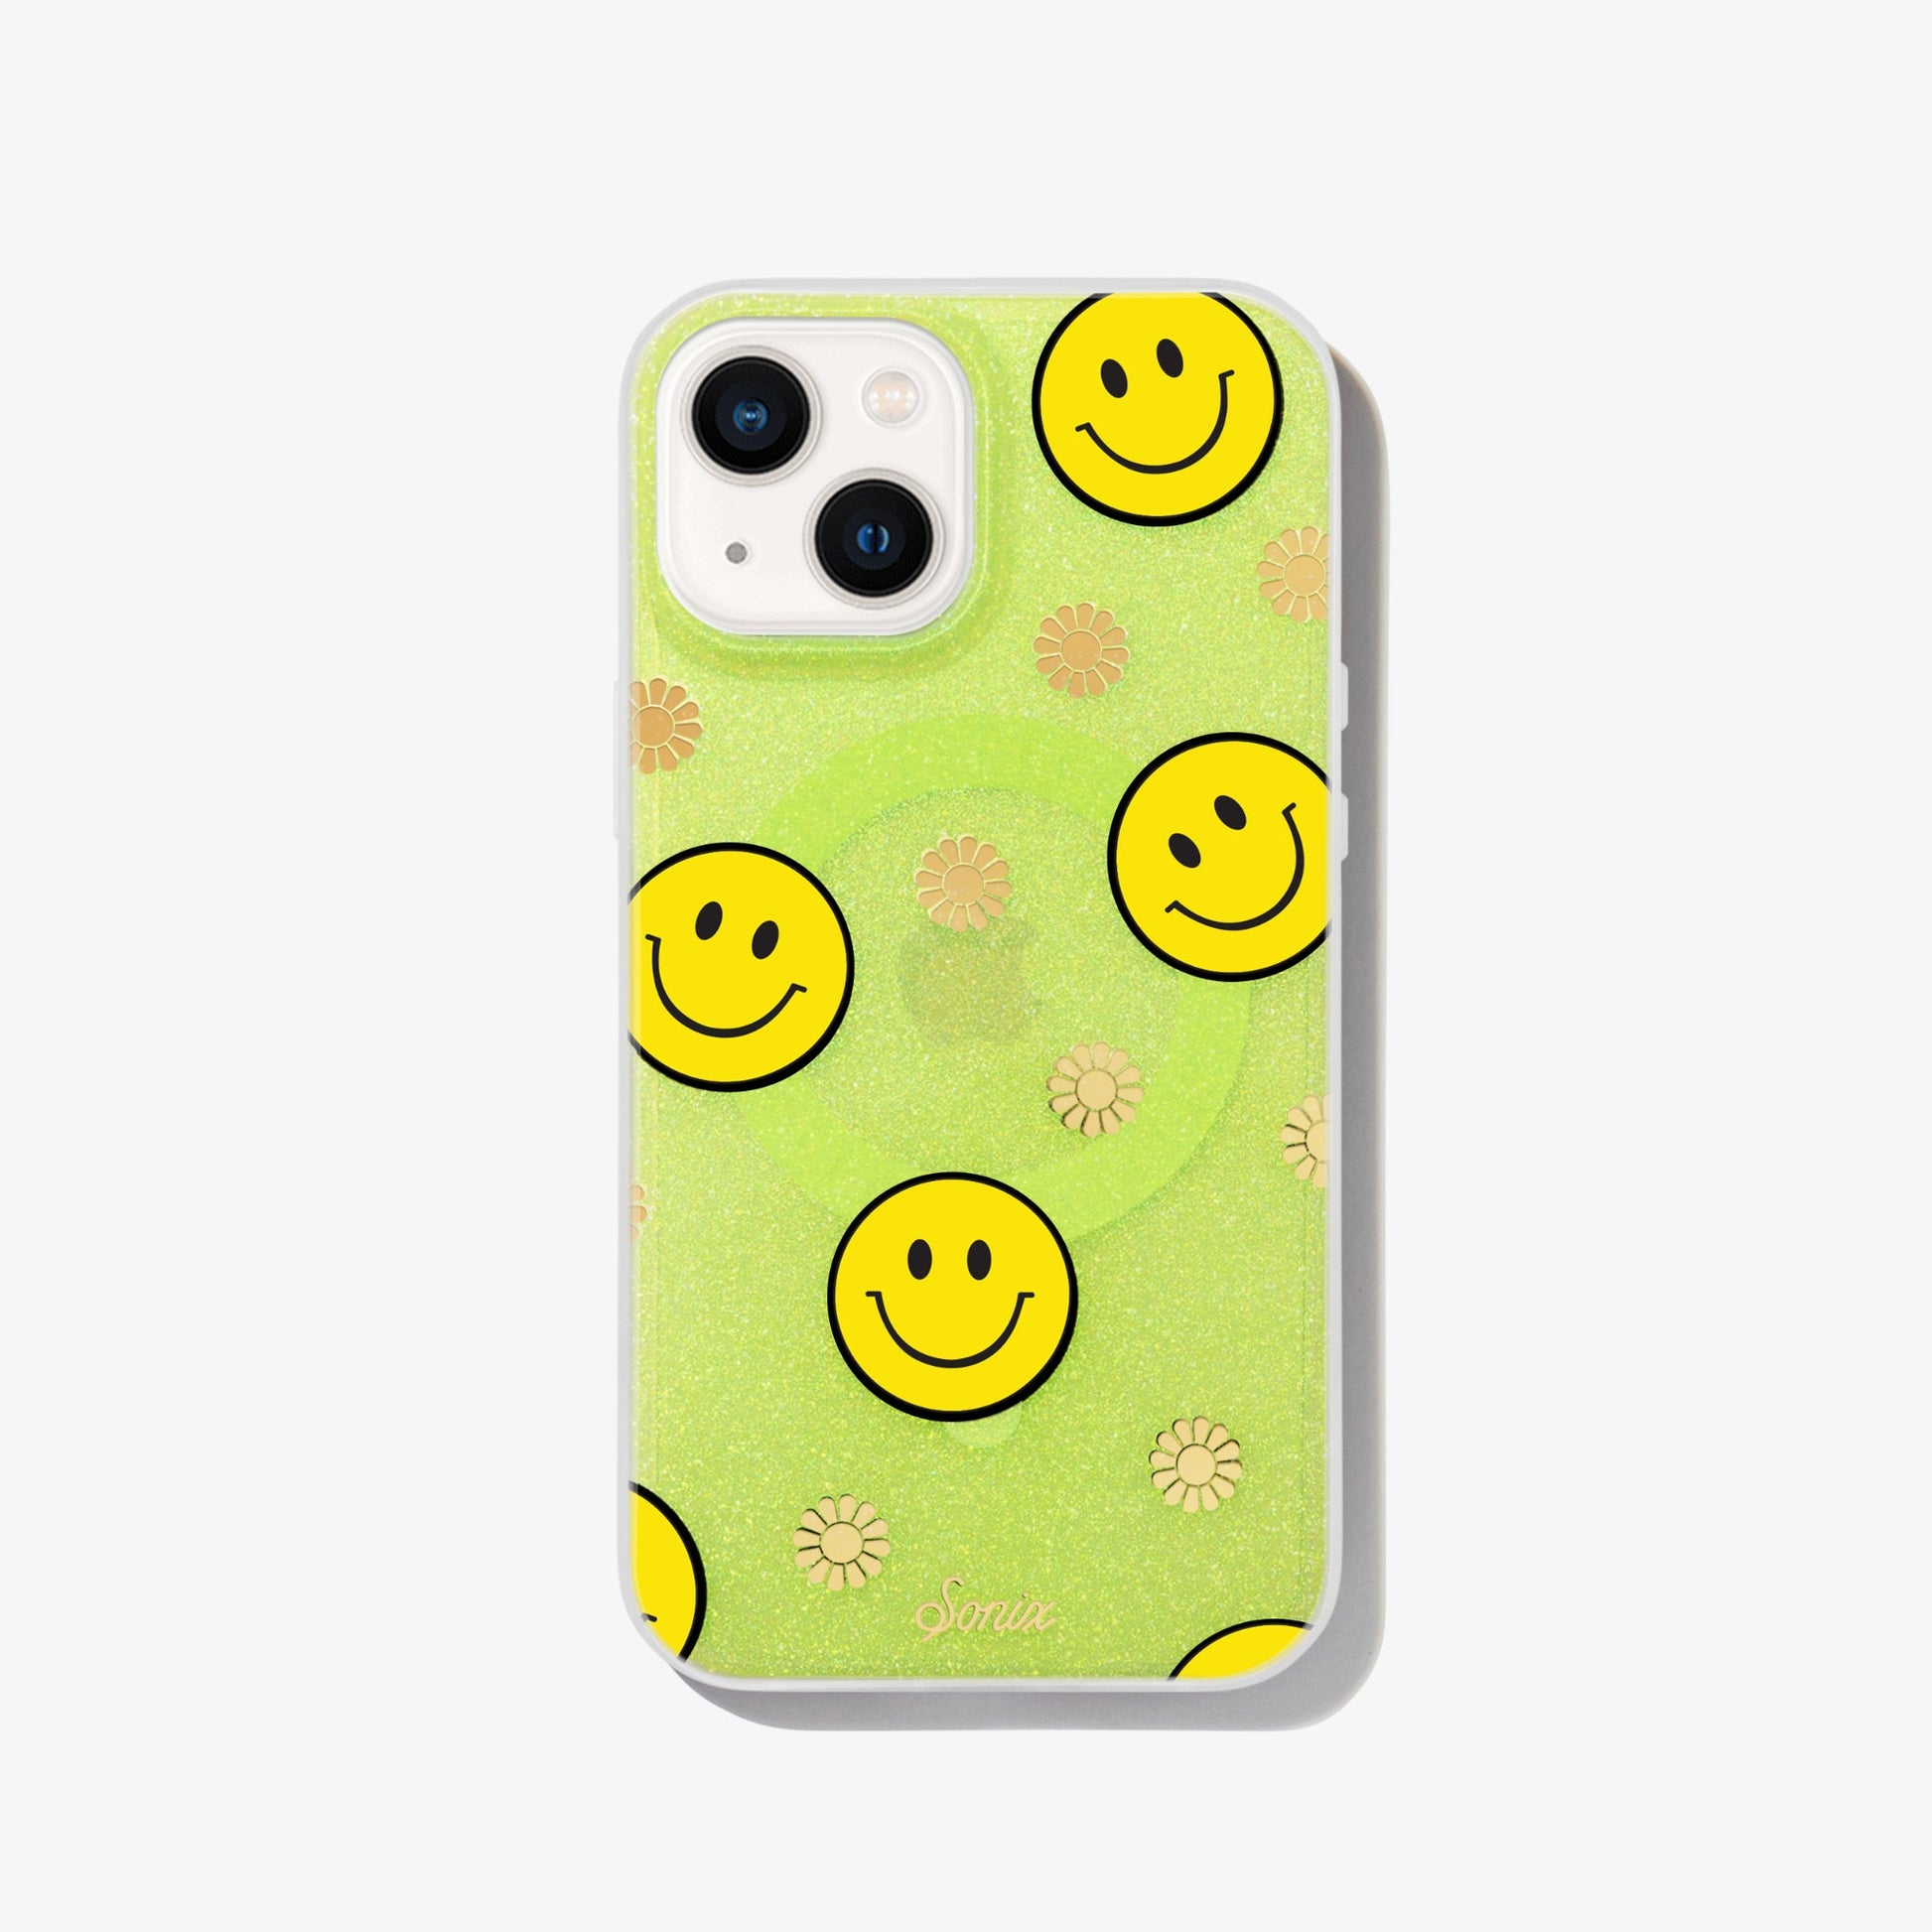 The clear yellow case infused with iridescent glitter features happy faces and signature gold foil flowers shown on an iphone 12